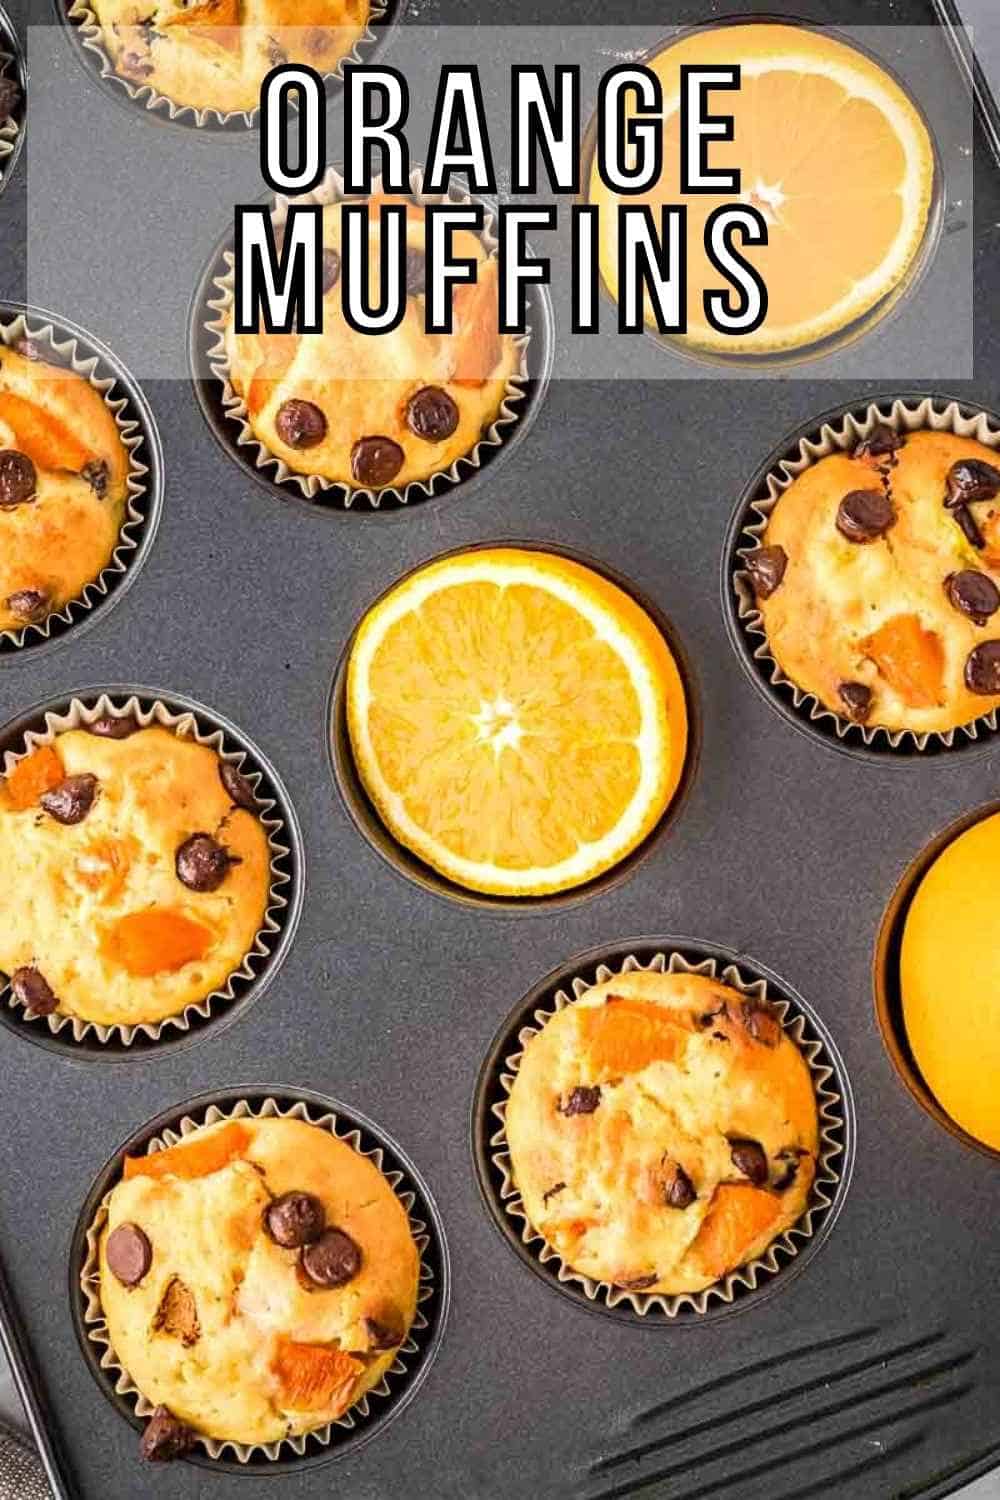 Overhead shot of a cupcake sheet filled with orange muffins and half slices of oranges.